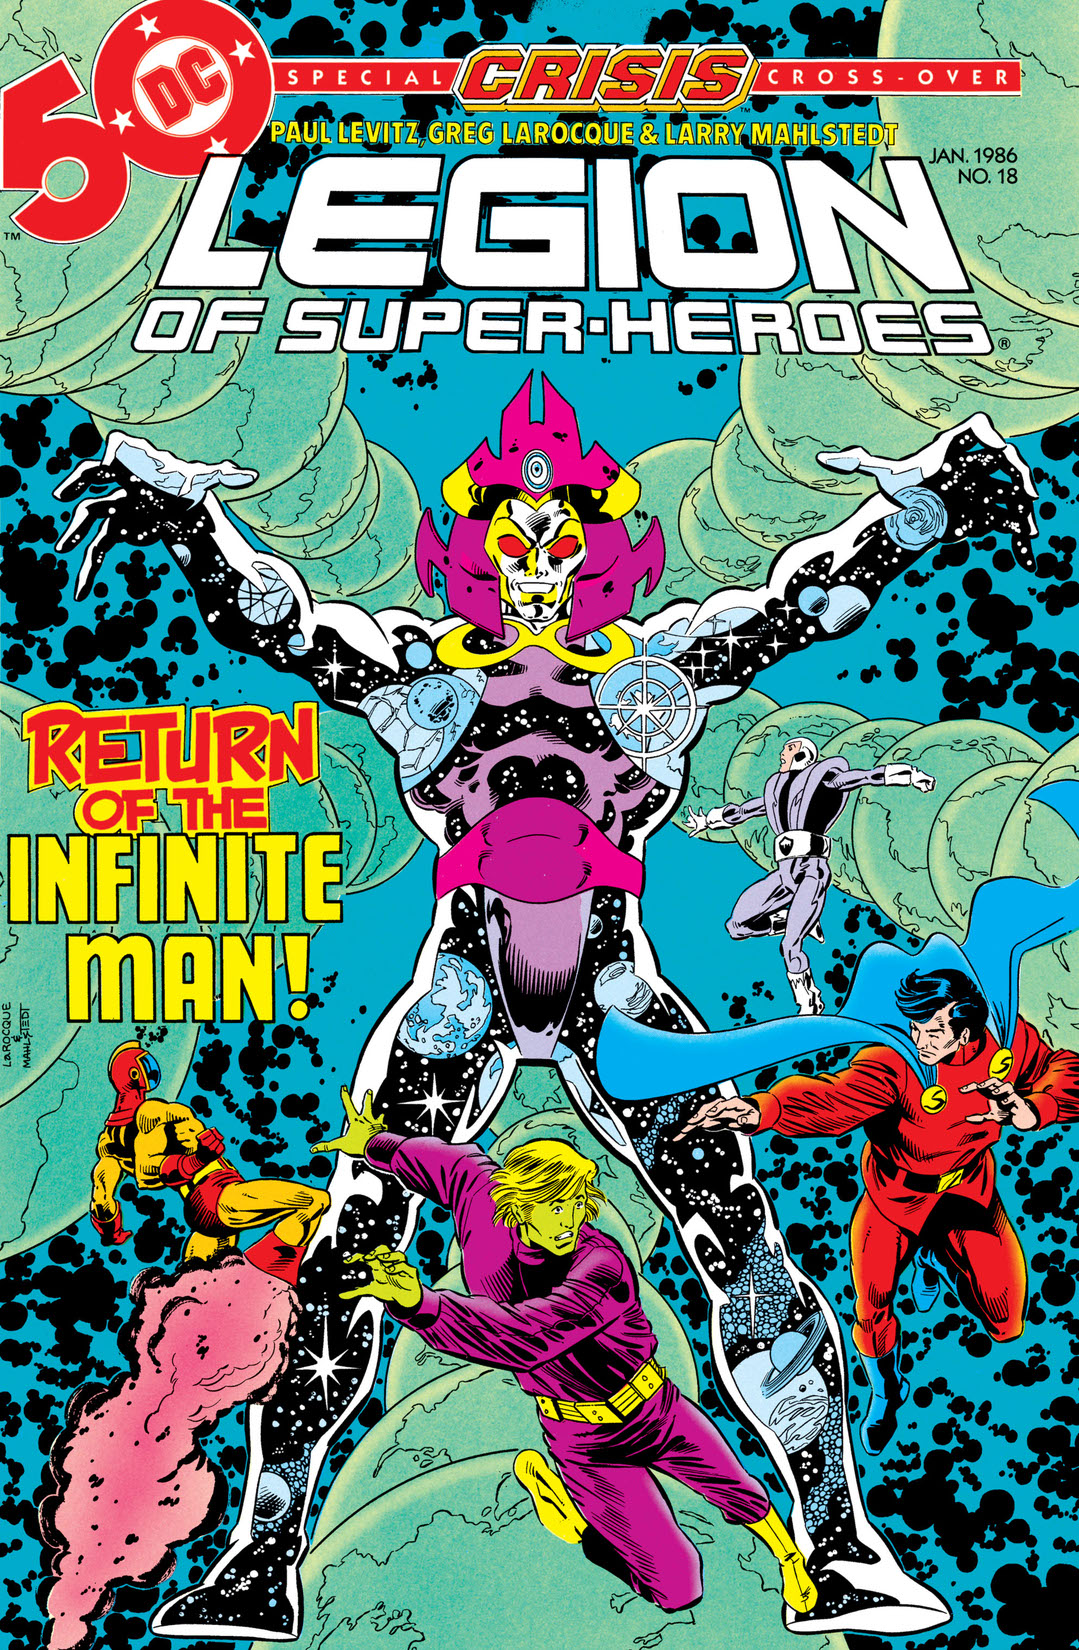 Legion of Super-Heroes (1984-) #18 preview images